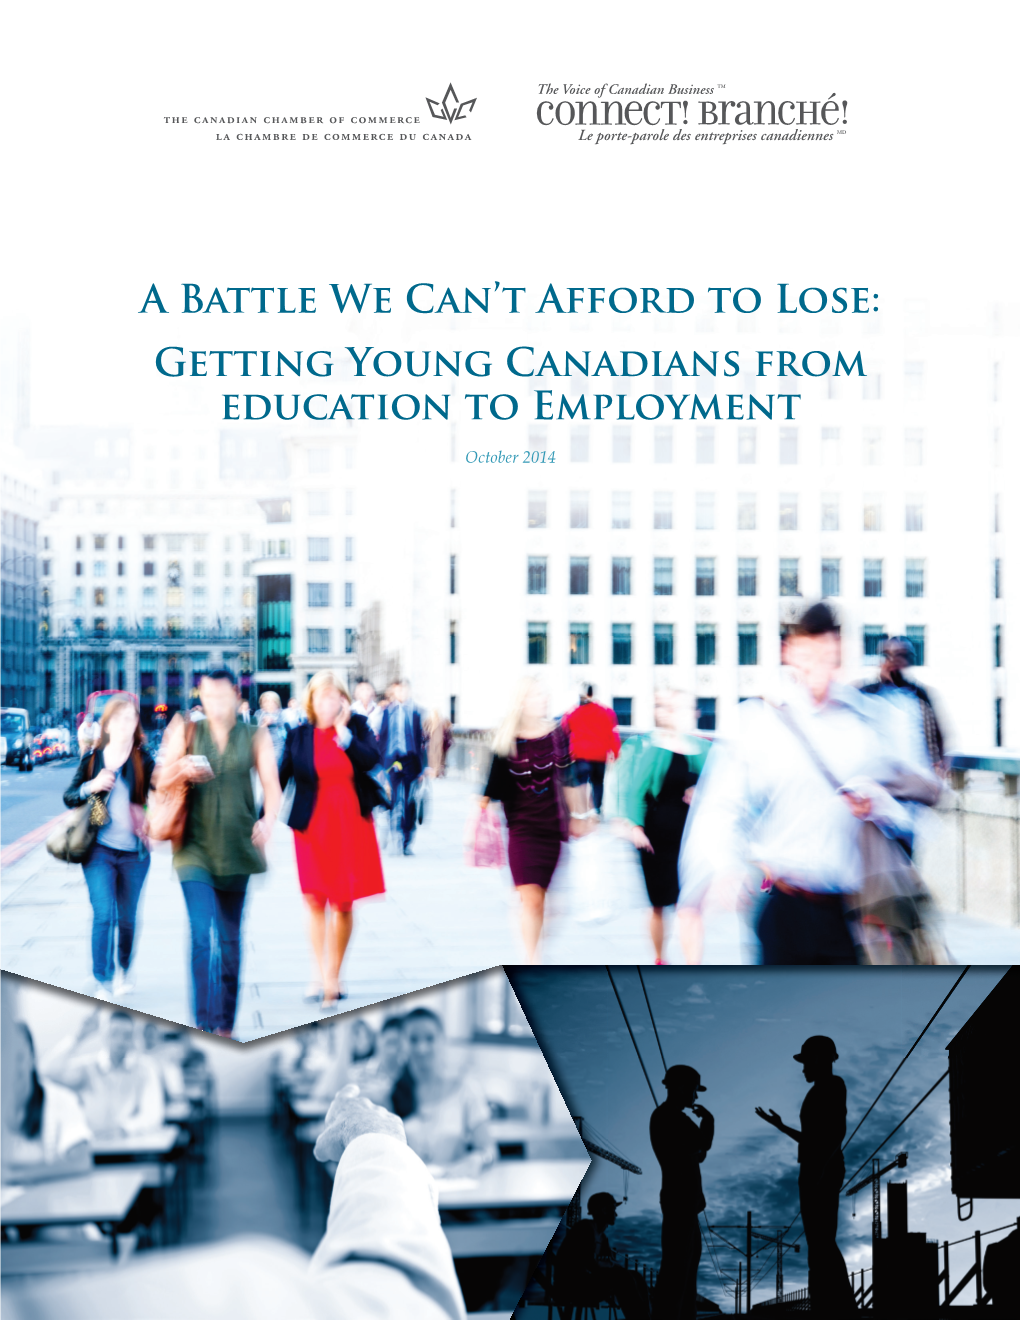 A Battle We Can't Afford to Lose: Getting Young Canadians From